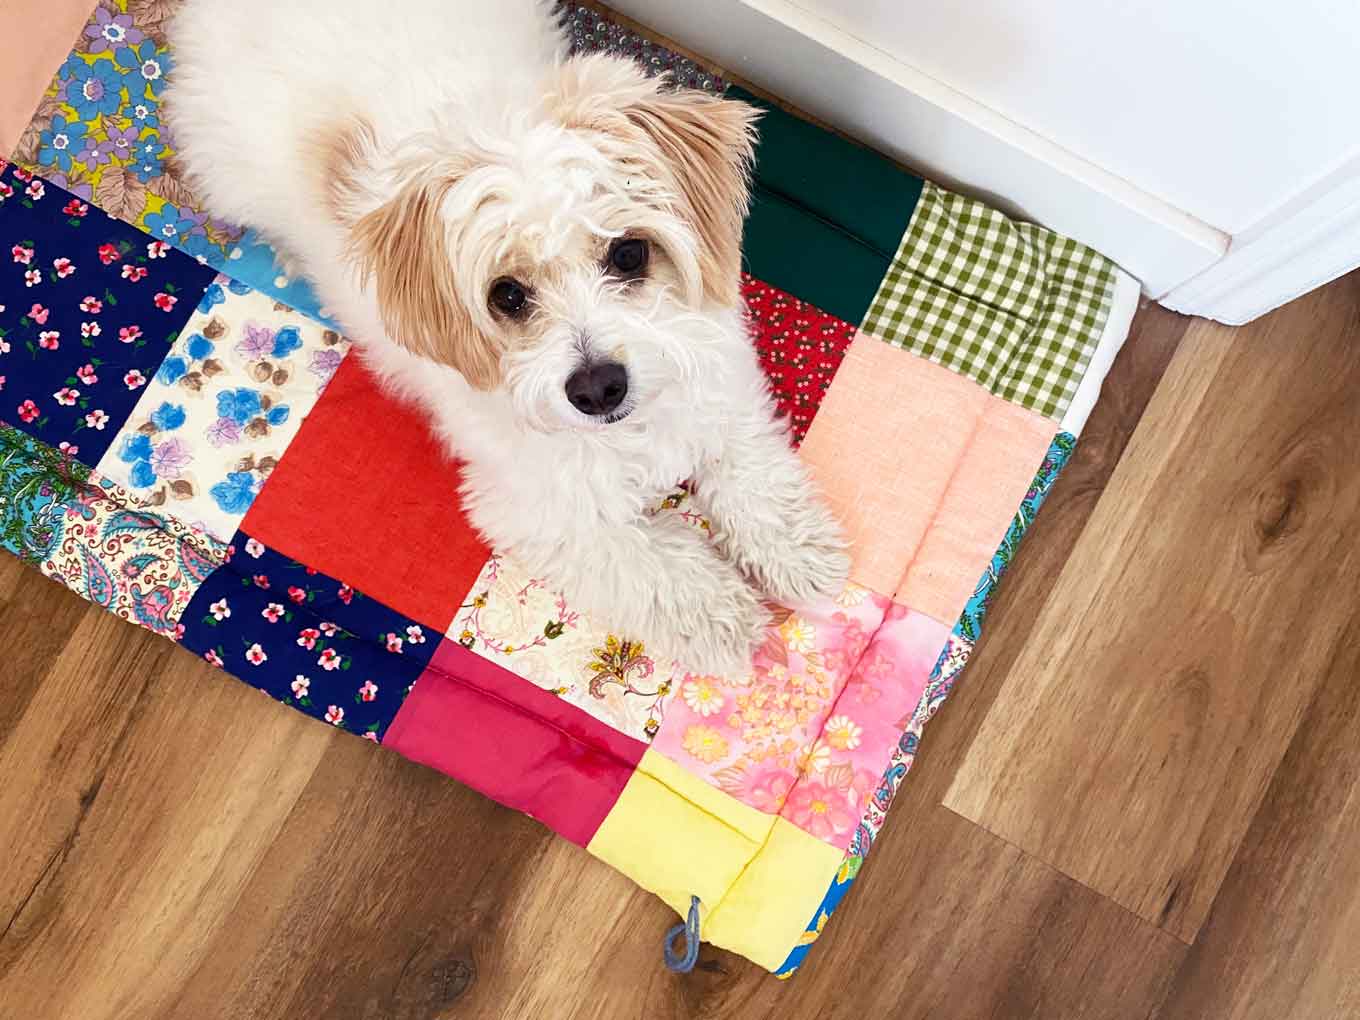 An eco-friendly dog mat made of patch-worked fabric, with a dog laying on it